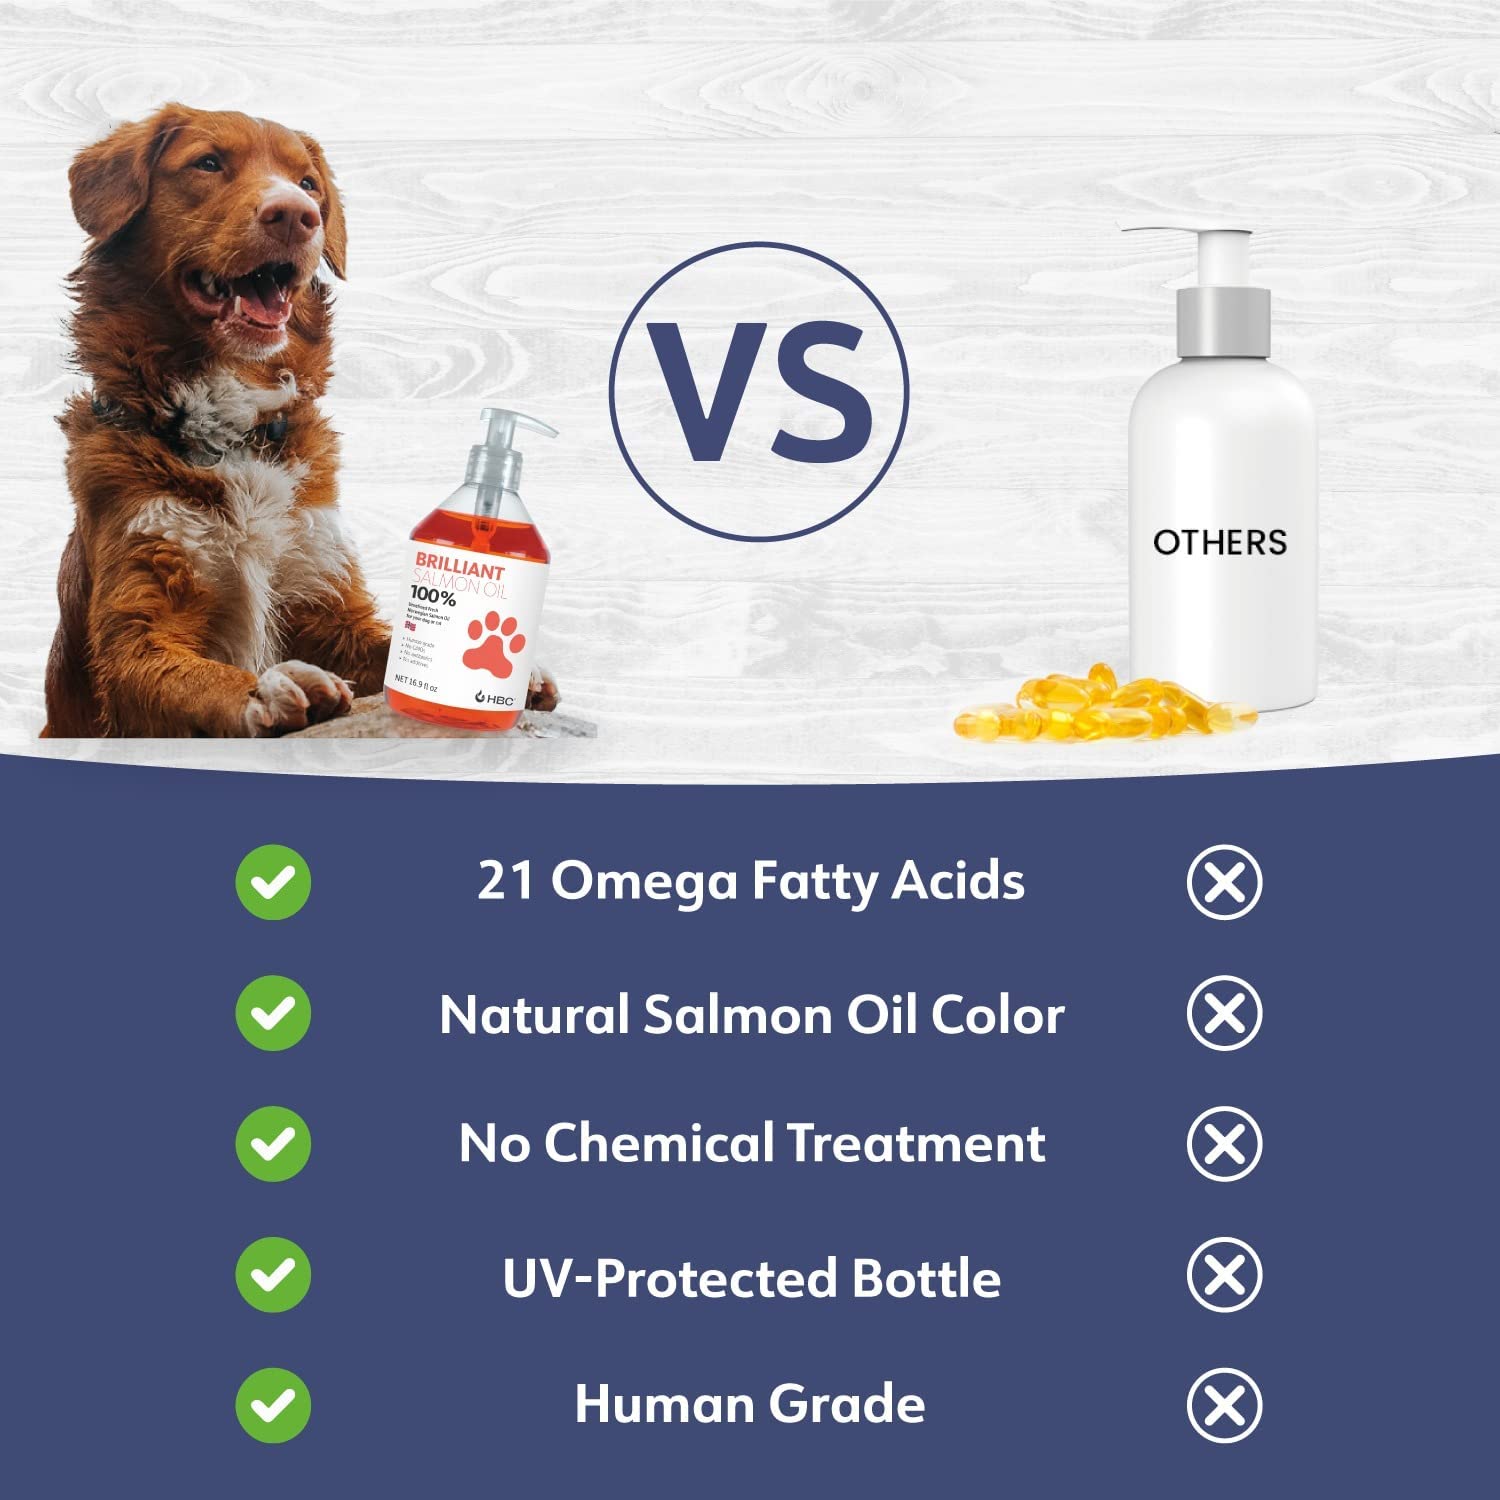 Brilliant Salmon Oil for Dogs, Cats & Puppies, Pure Omega 3 Fish Oil Liquid Food Supplement with DHA & EPA Fatty Acids, by Hofseth BioCare (10 Ounce)(Pack of 2)